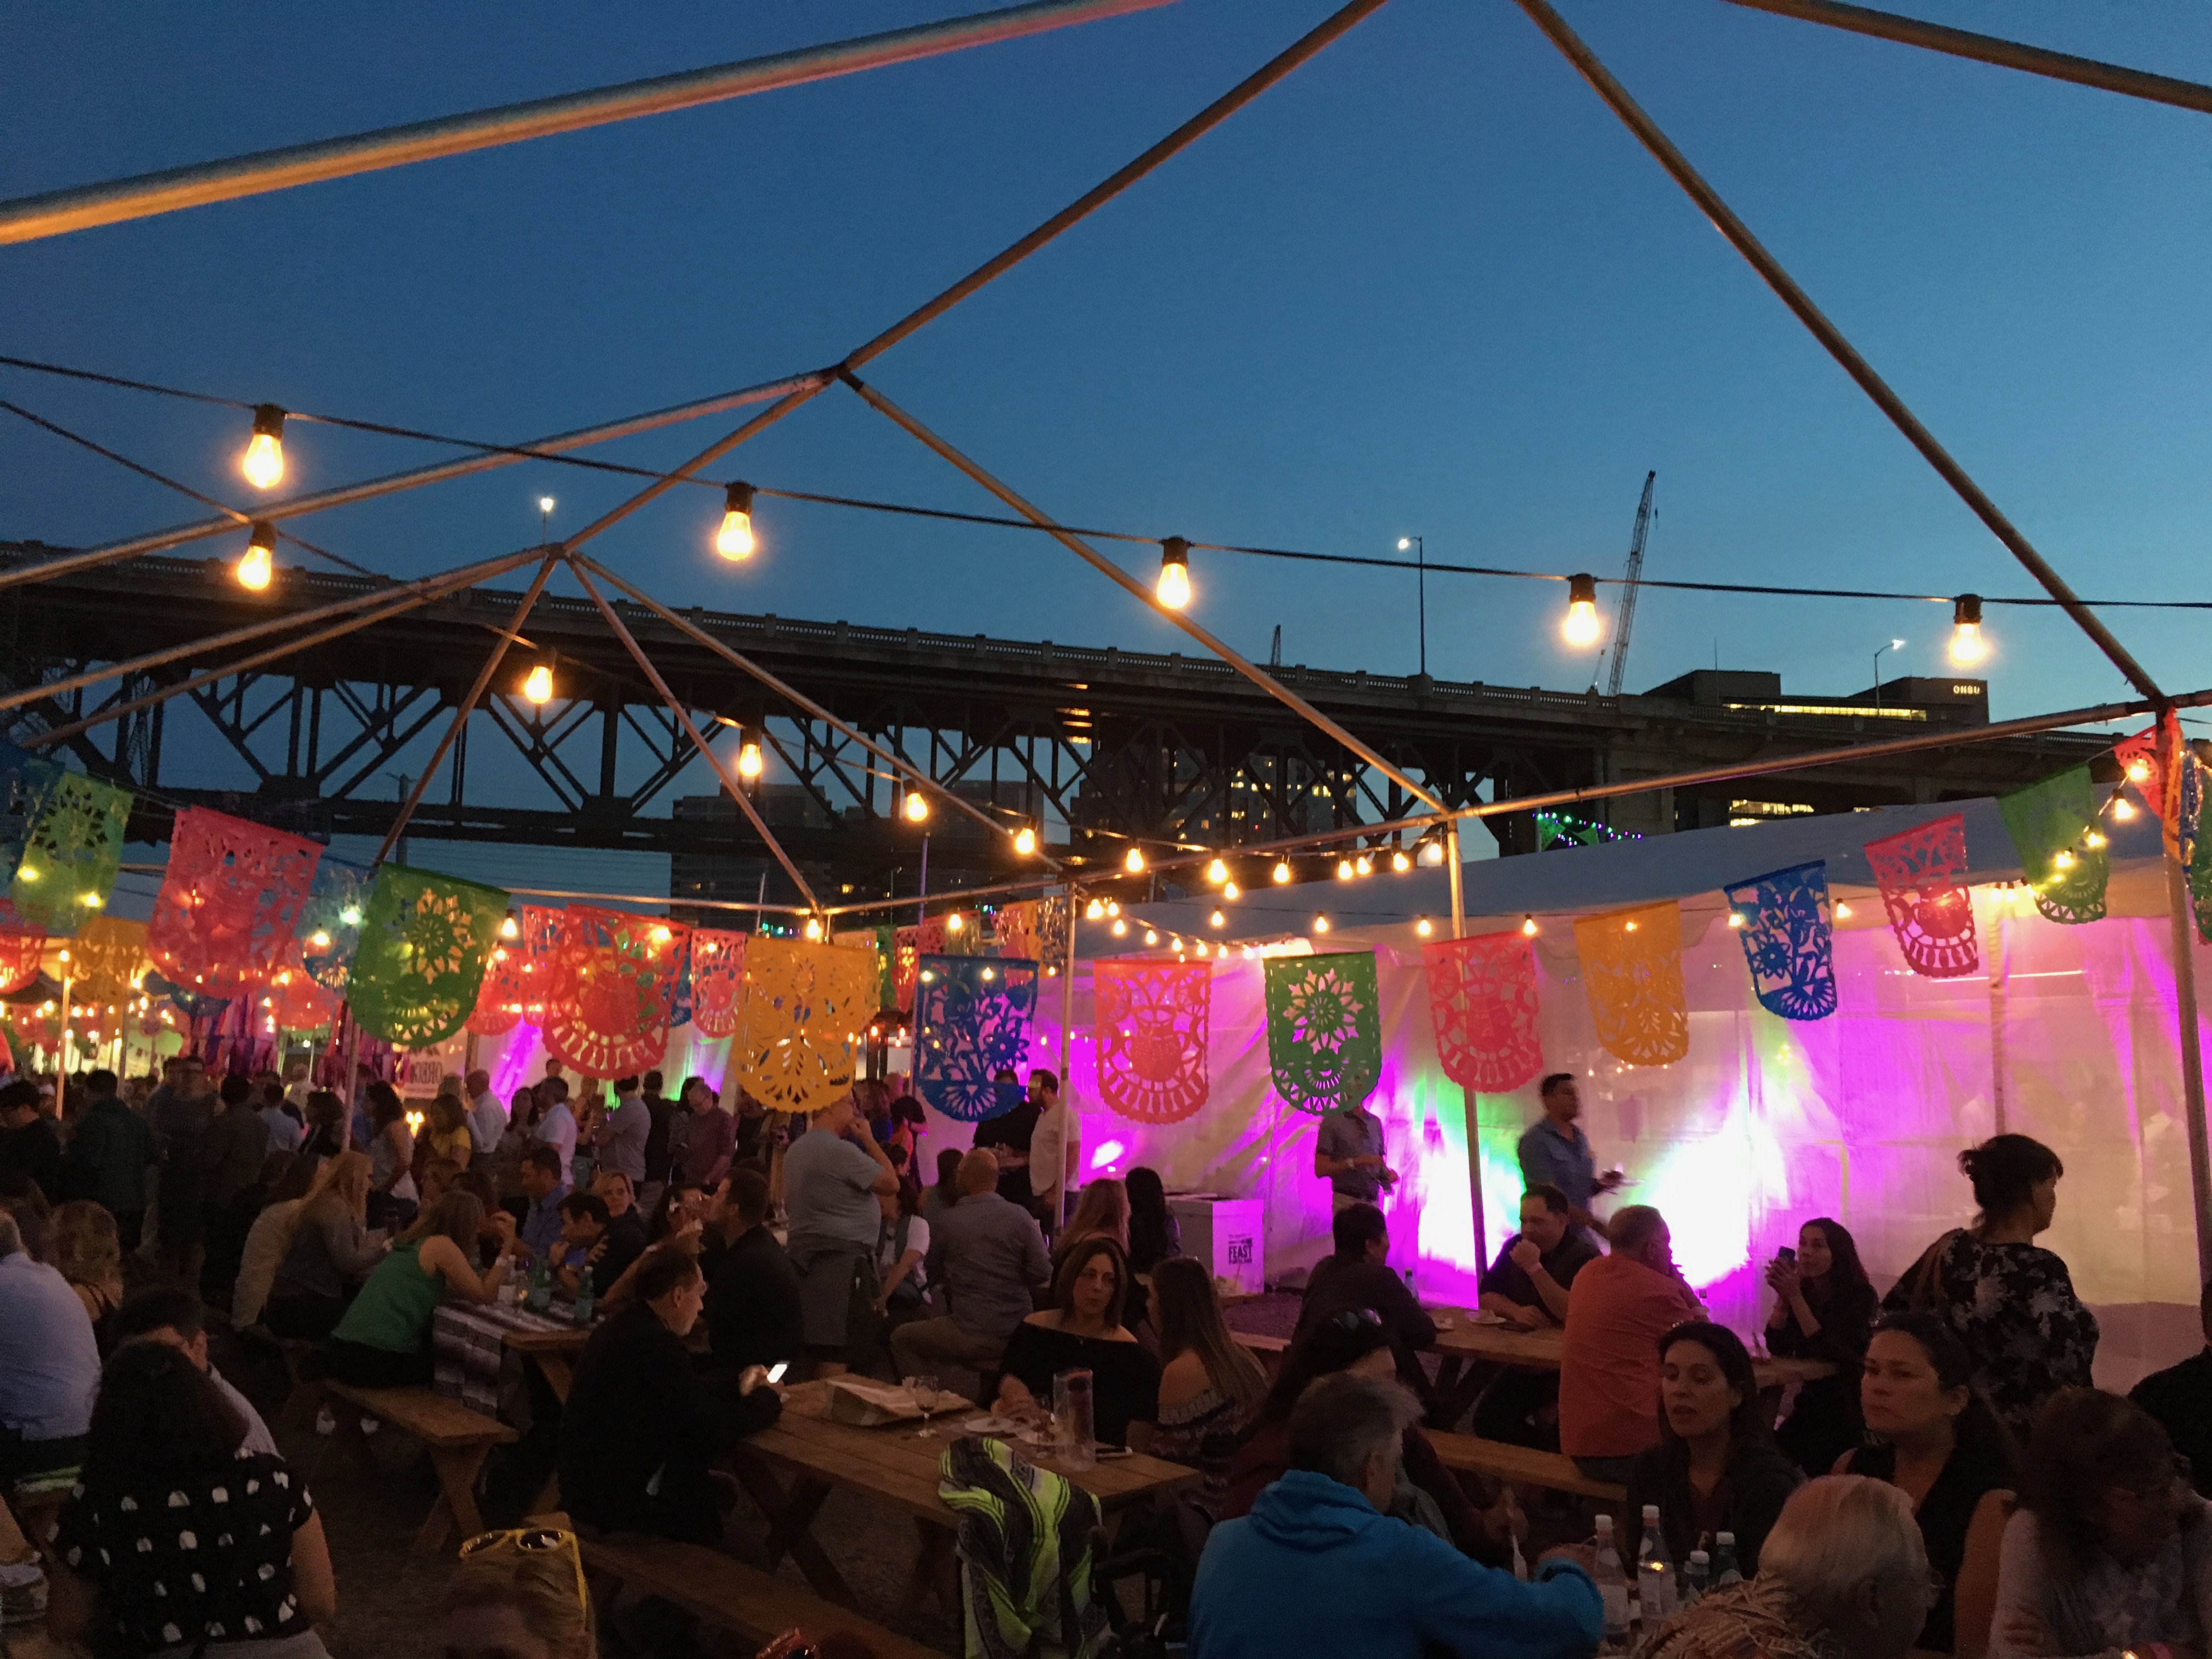 The lights and setting along the Willamette River is a highlight of Feast Night Market.